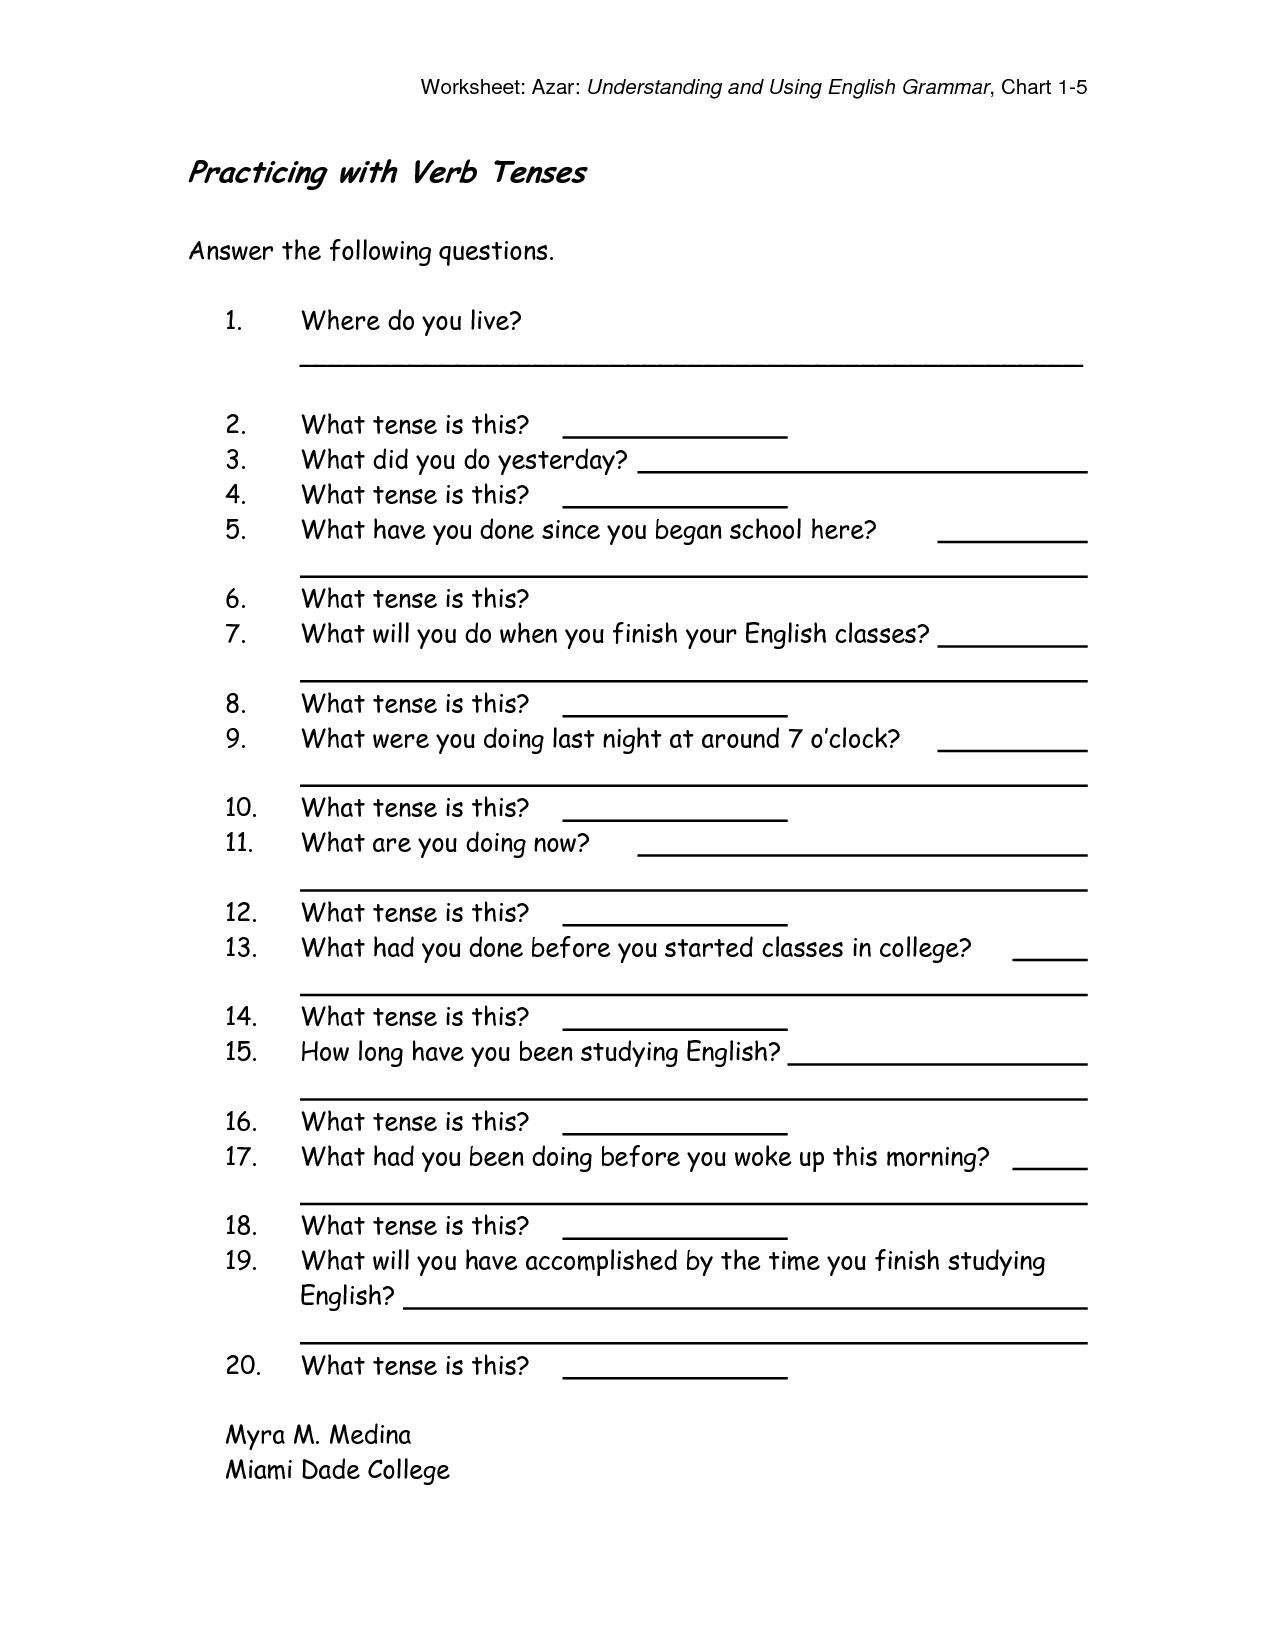 verb-to-be-interactive-worksheet